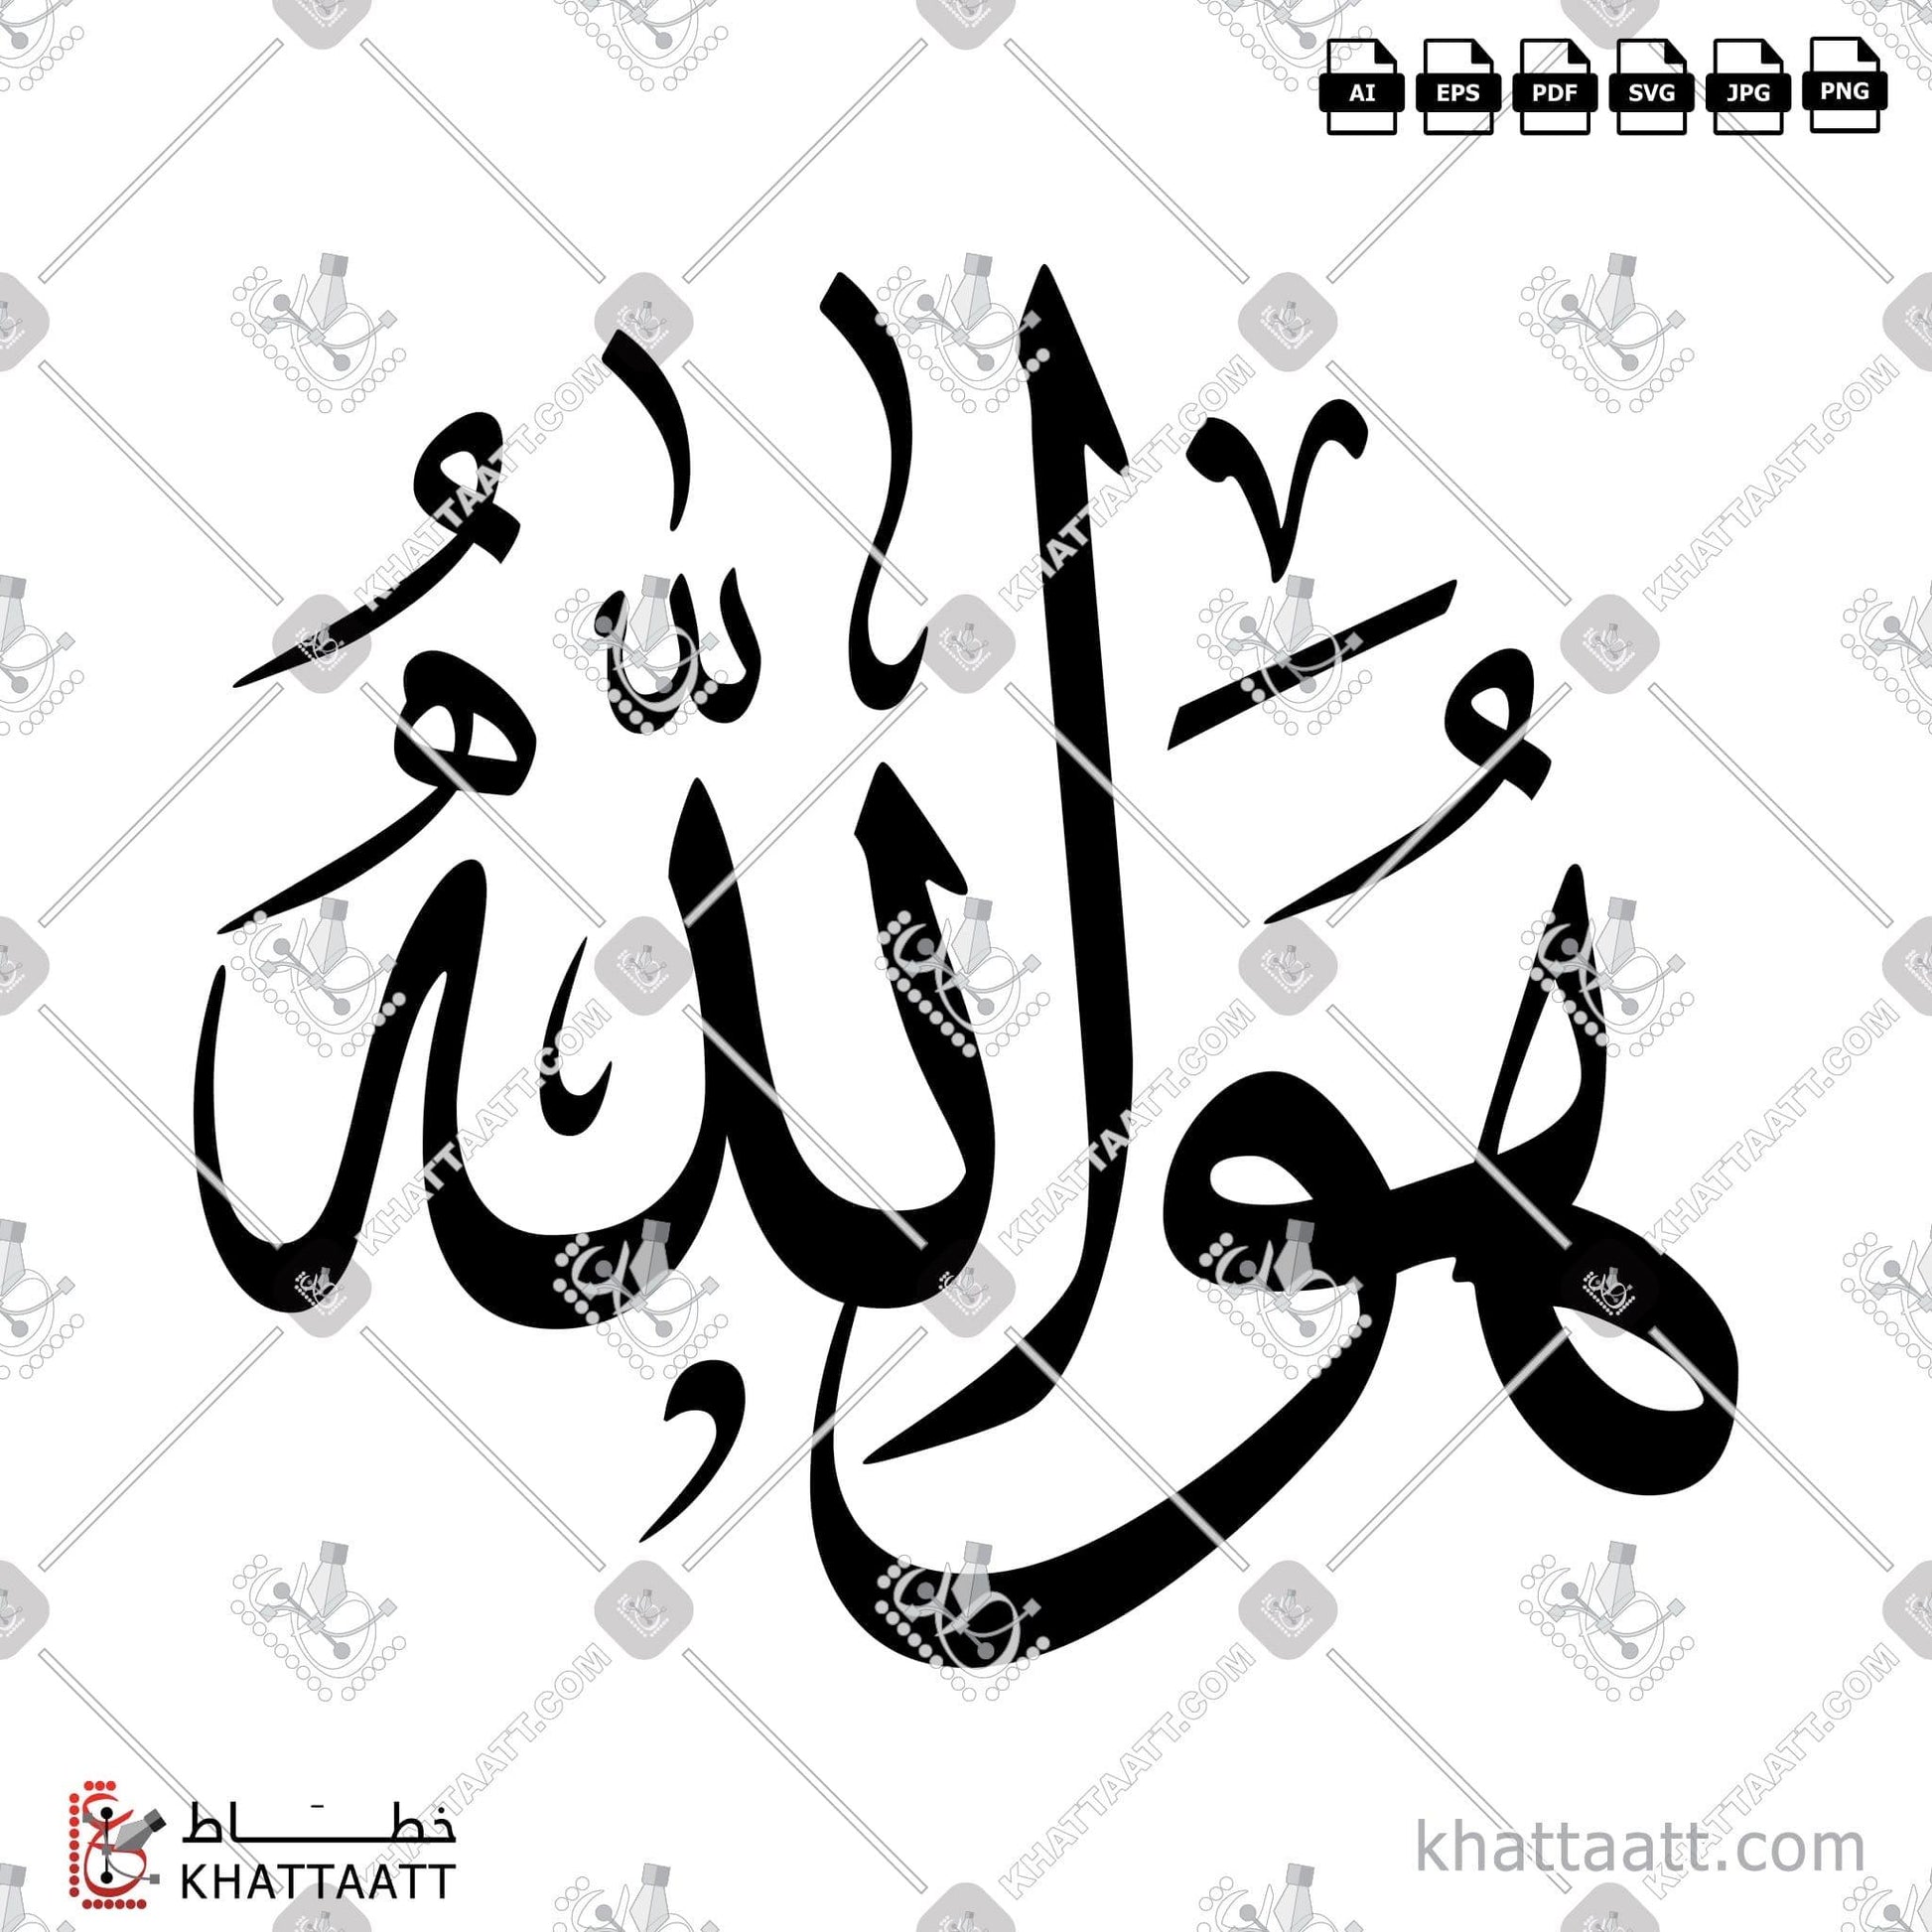 Download Arabic Calligraphy of Huwa Allahu - هو الله in Thuluth - خط الثلث in vector and .png